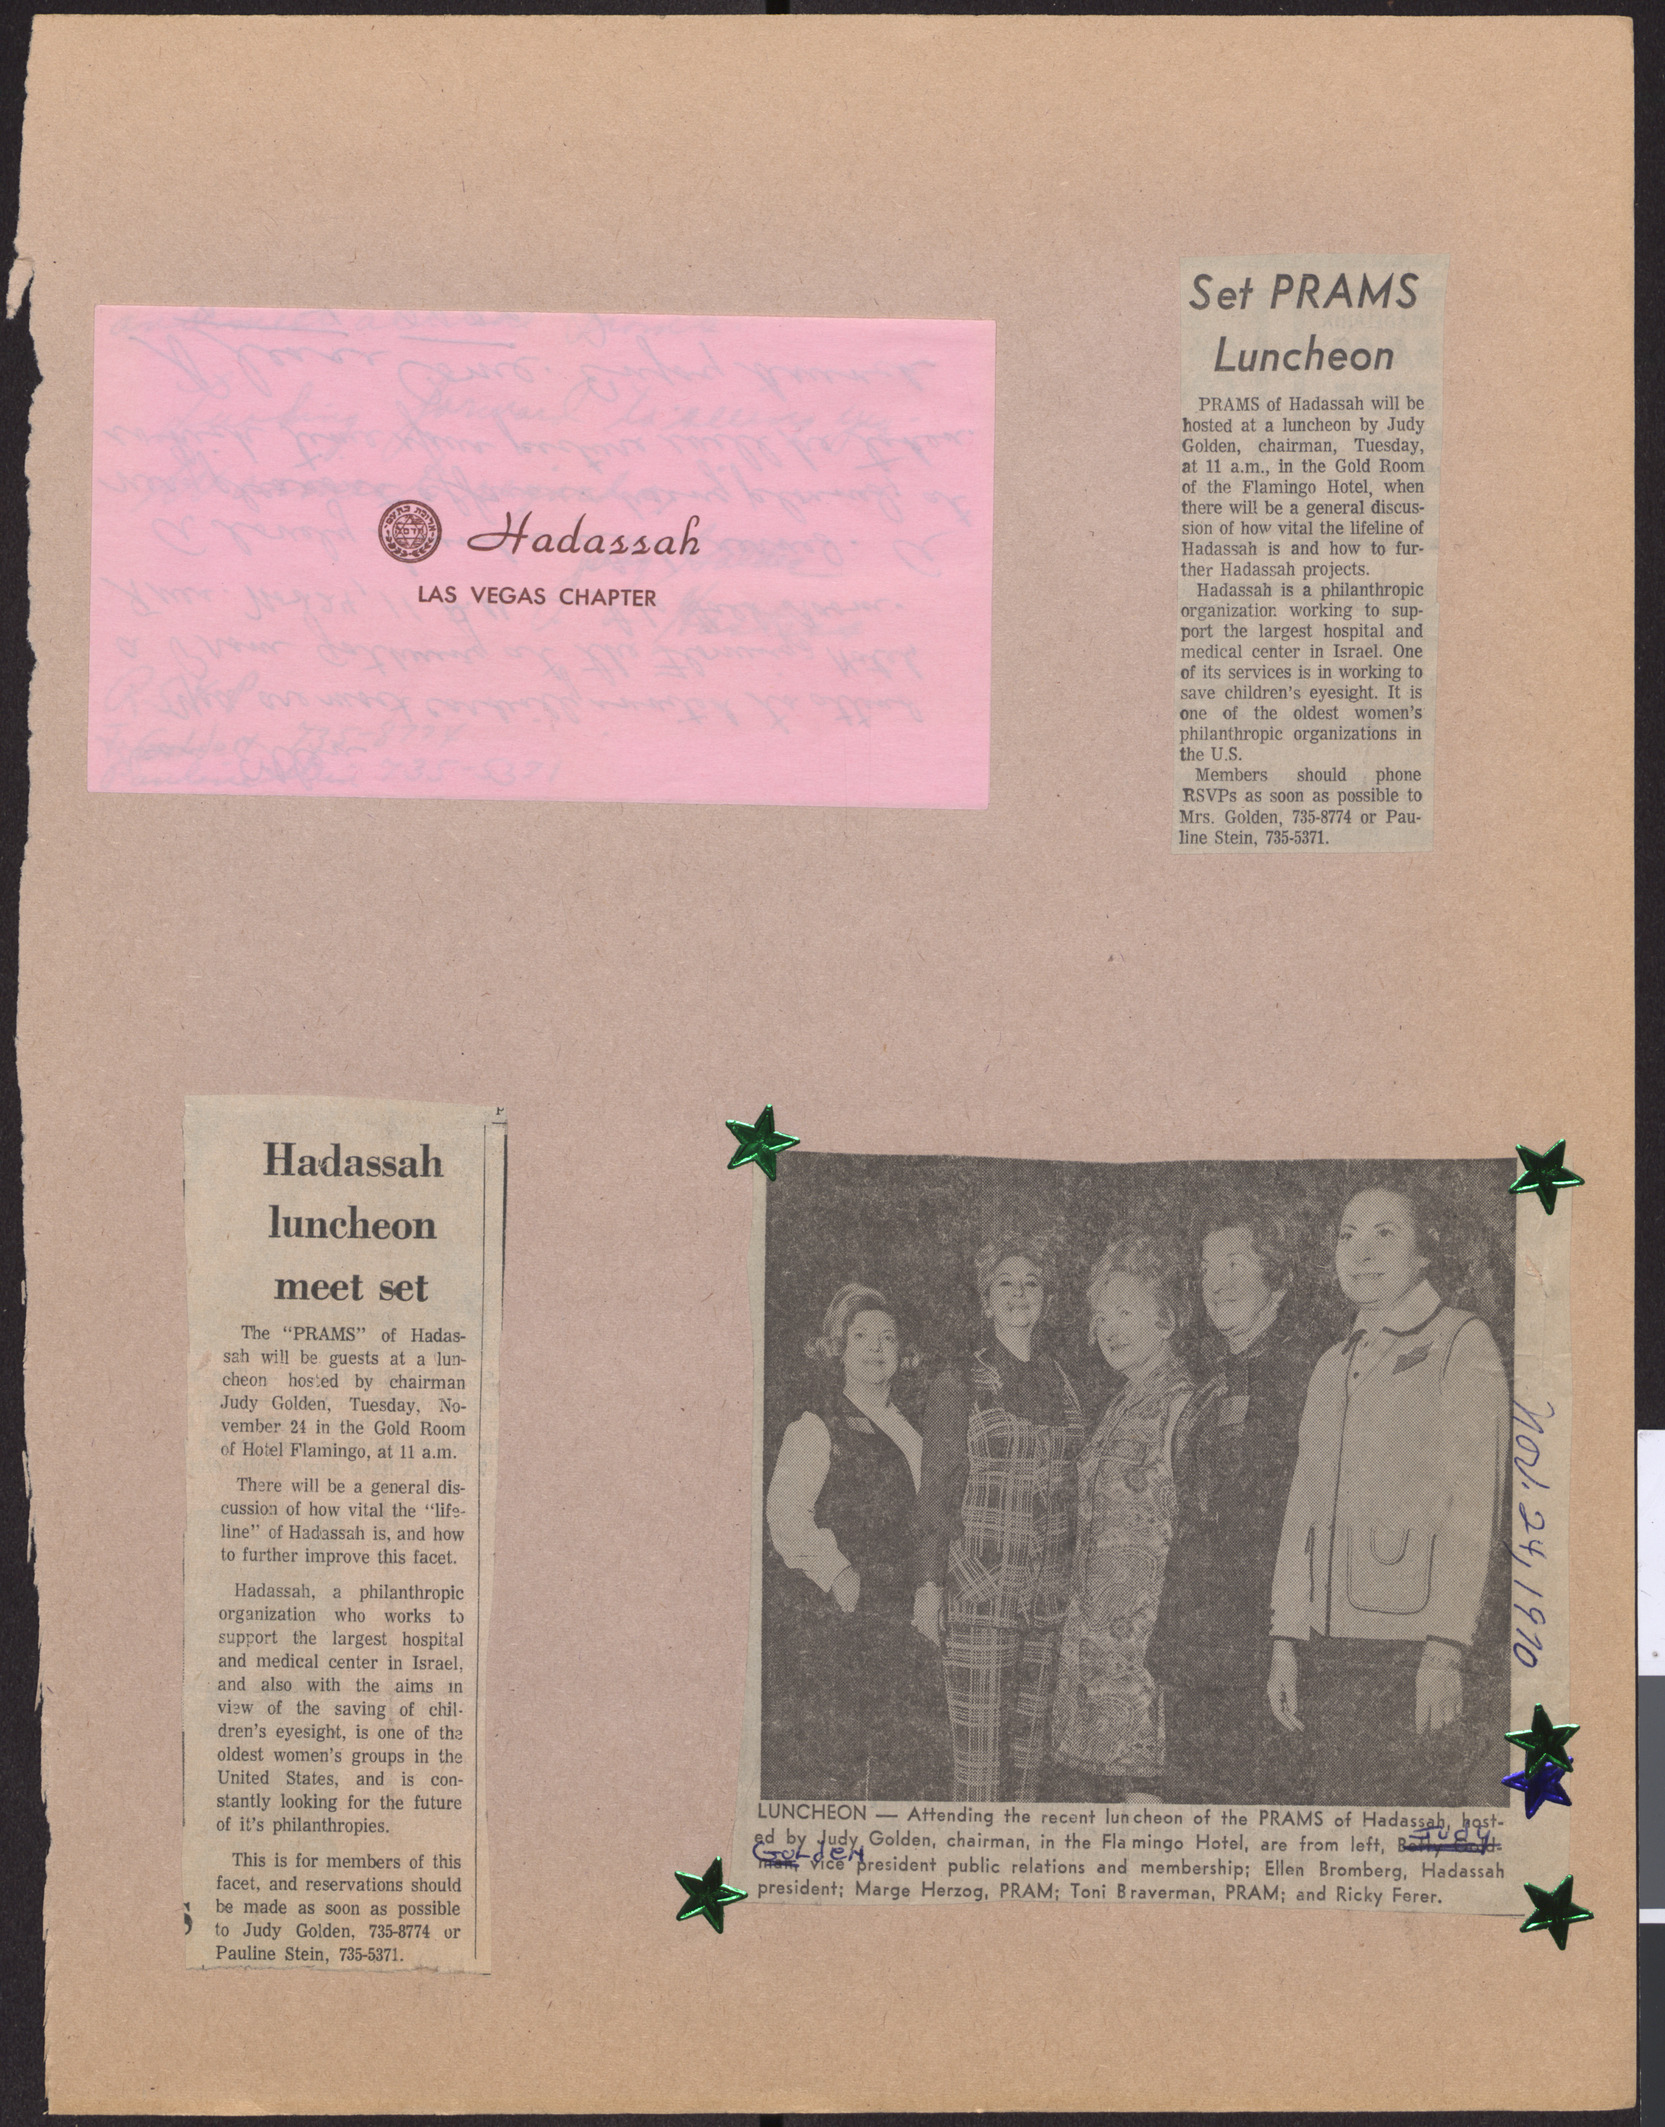 Hadassah notecard and newspaper clippings about Hadassah luncheon event, November 1970